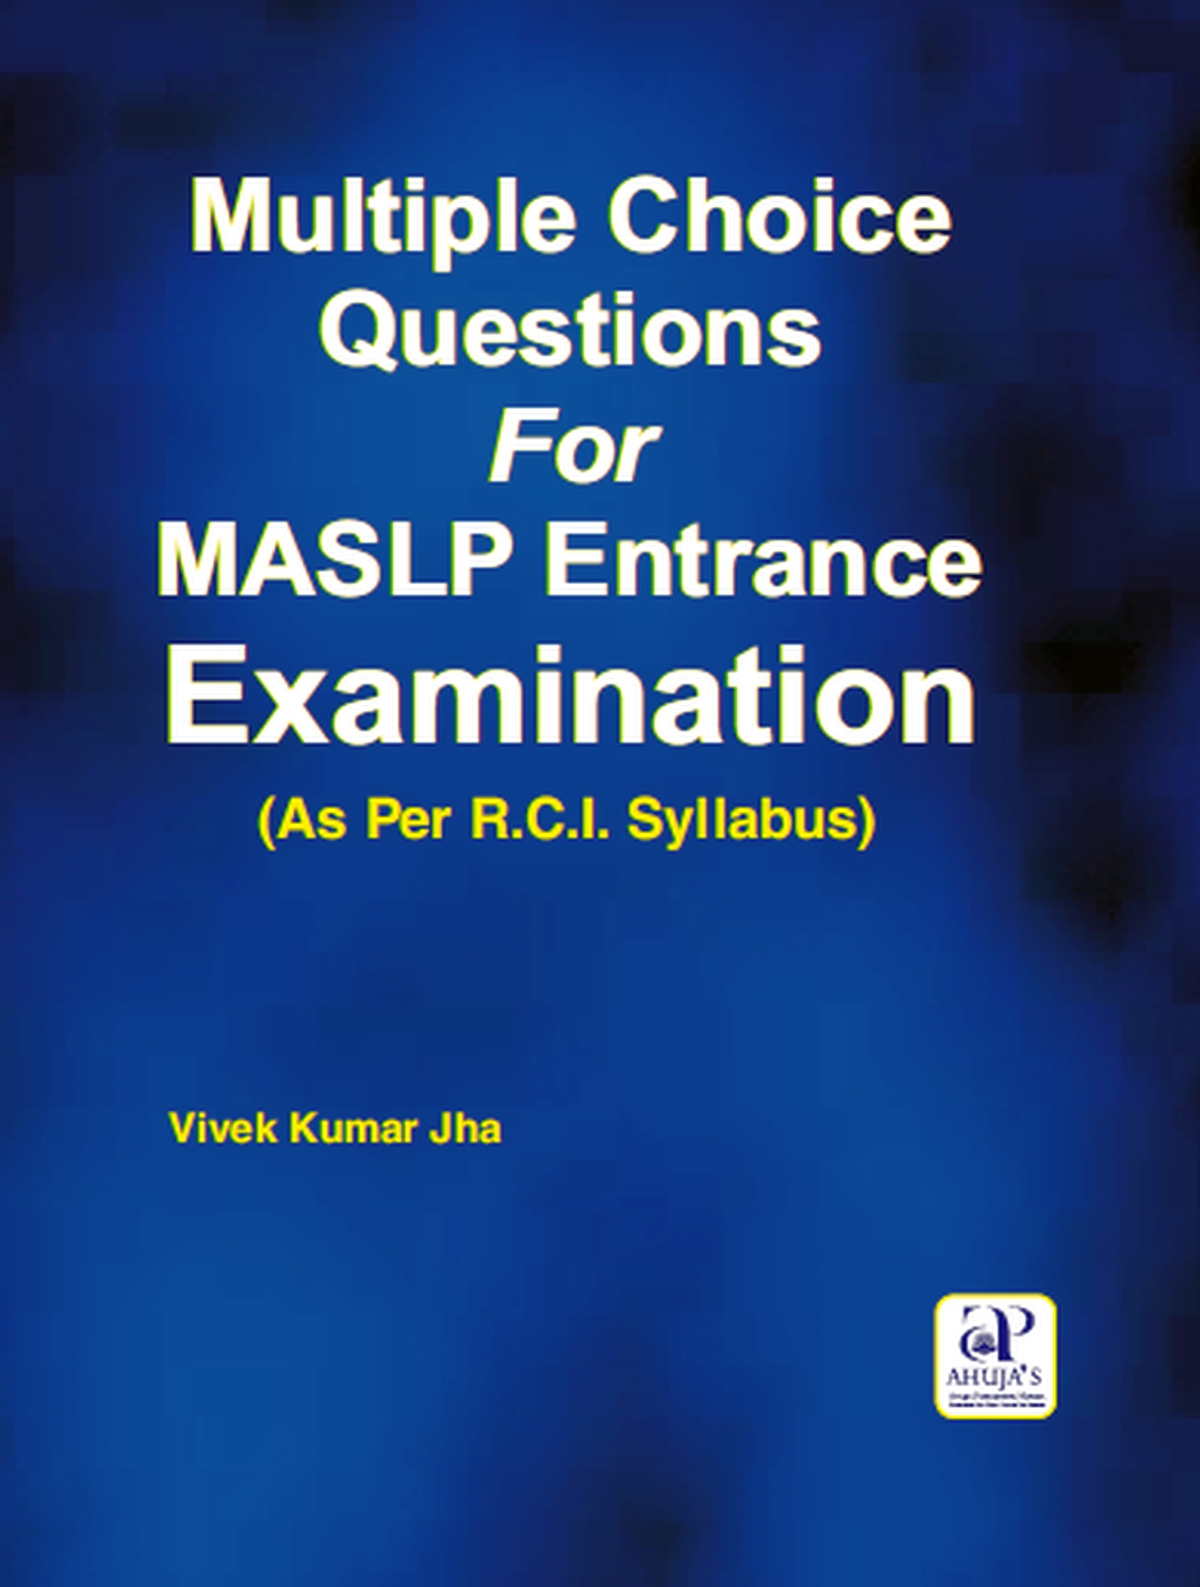 

exclusive-publishers/ahuja-publishing-house/multiple-choice-questions-for-maslp-entrance-examination-as-per-r-c-l-syllabus--9789380316857